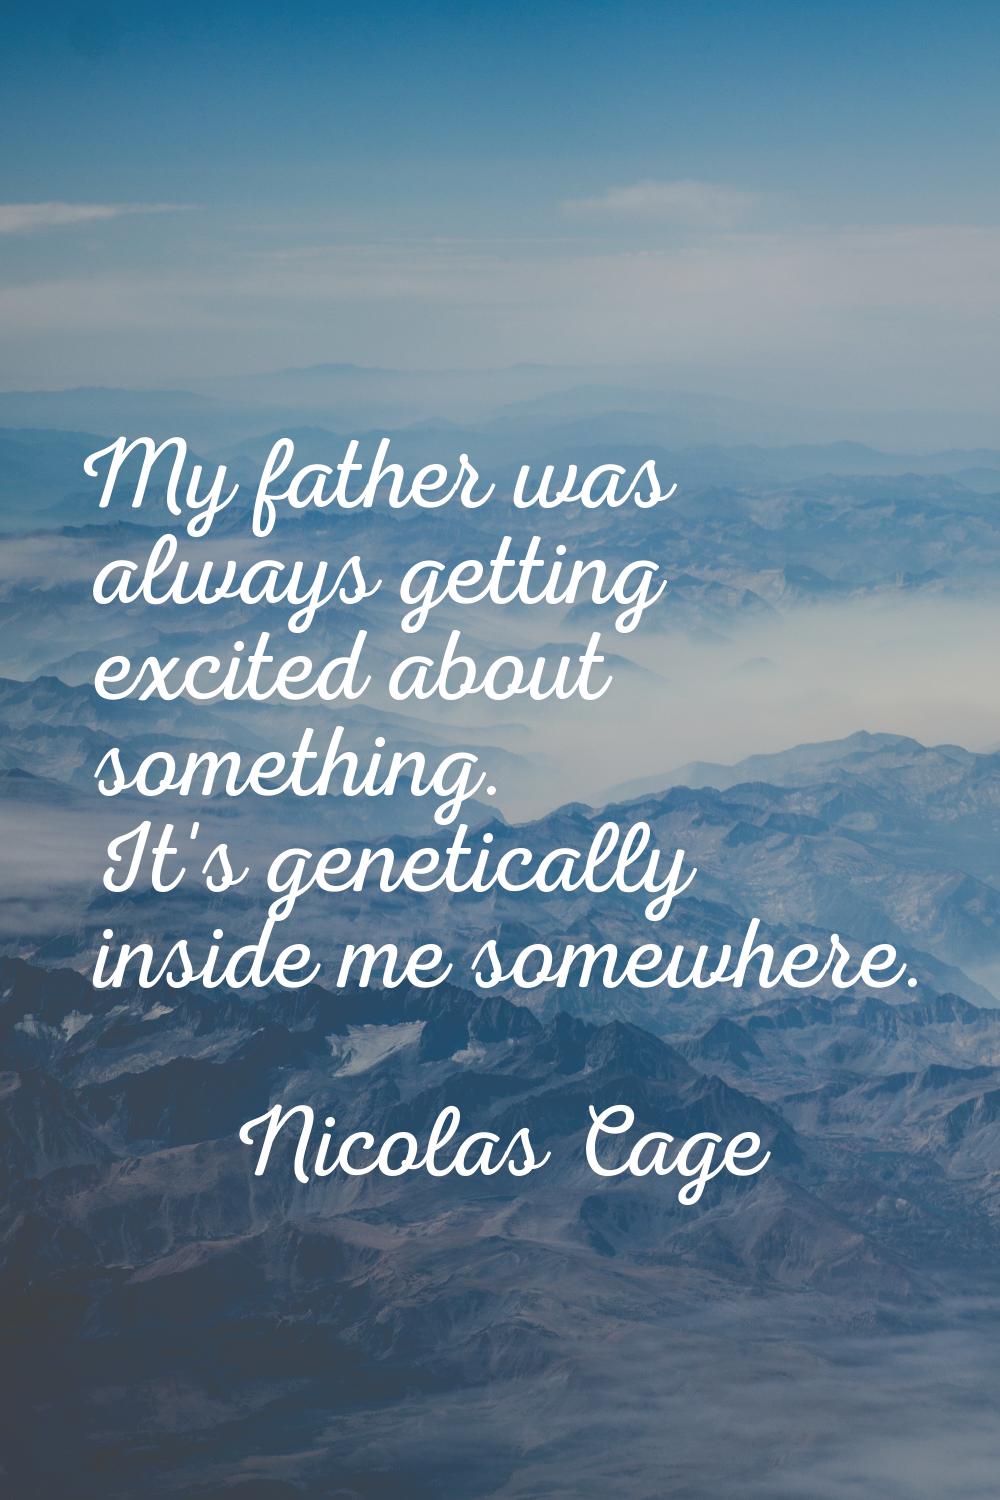 My father was always getting excited about something. It's genetically inside me somewhere.